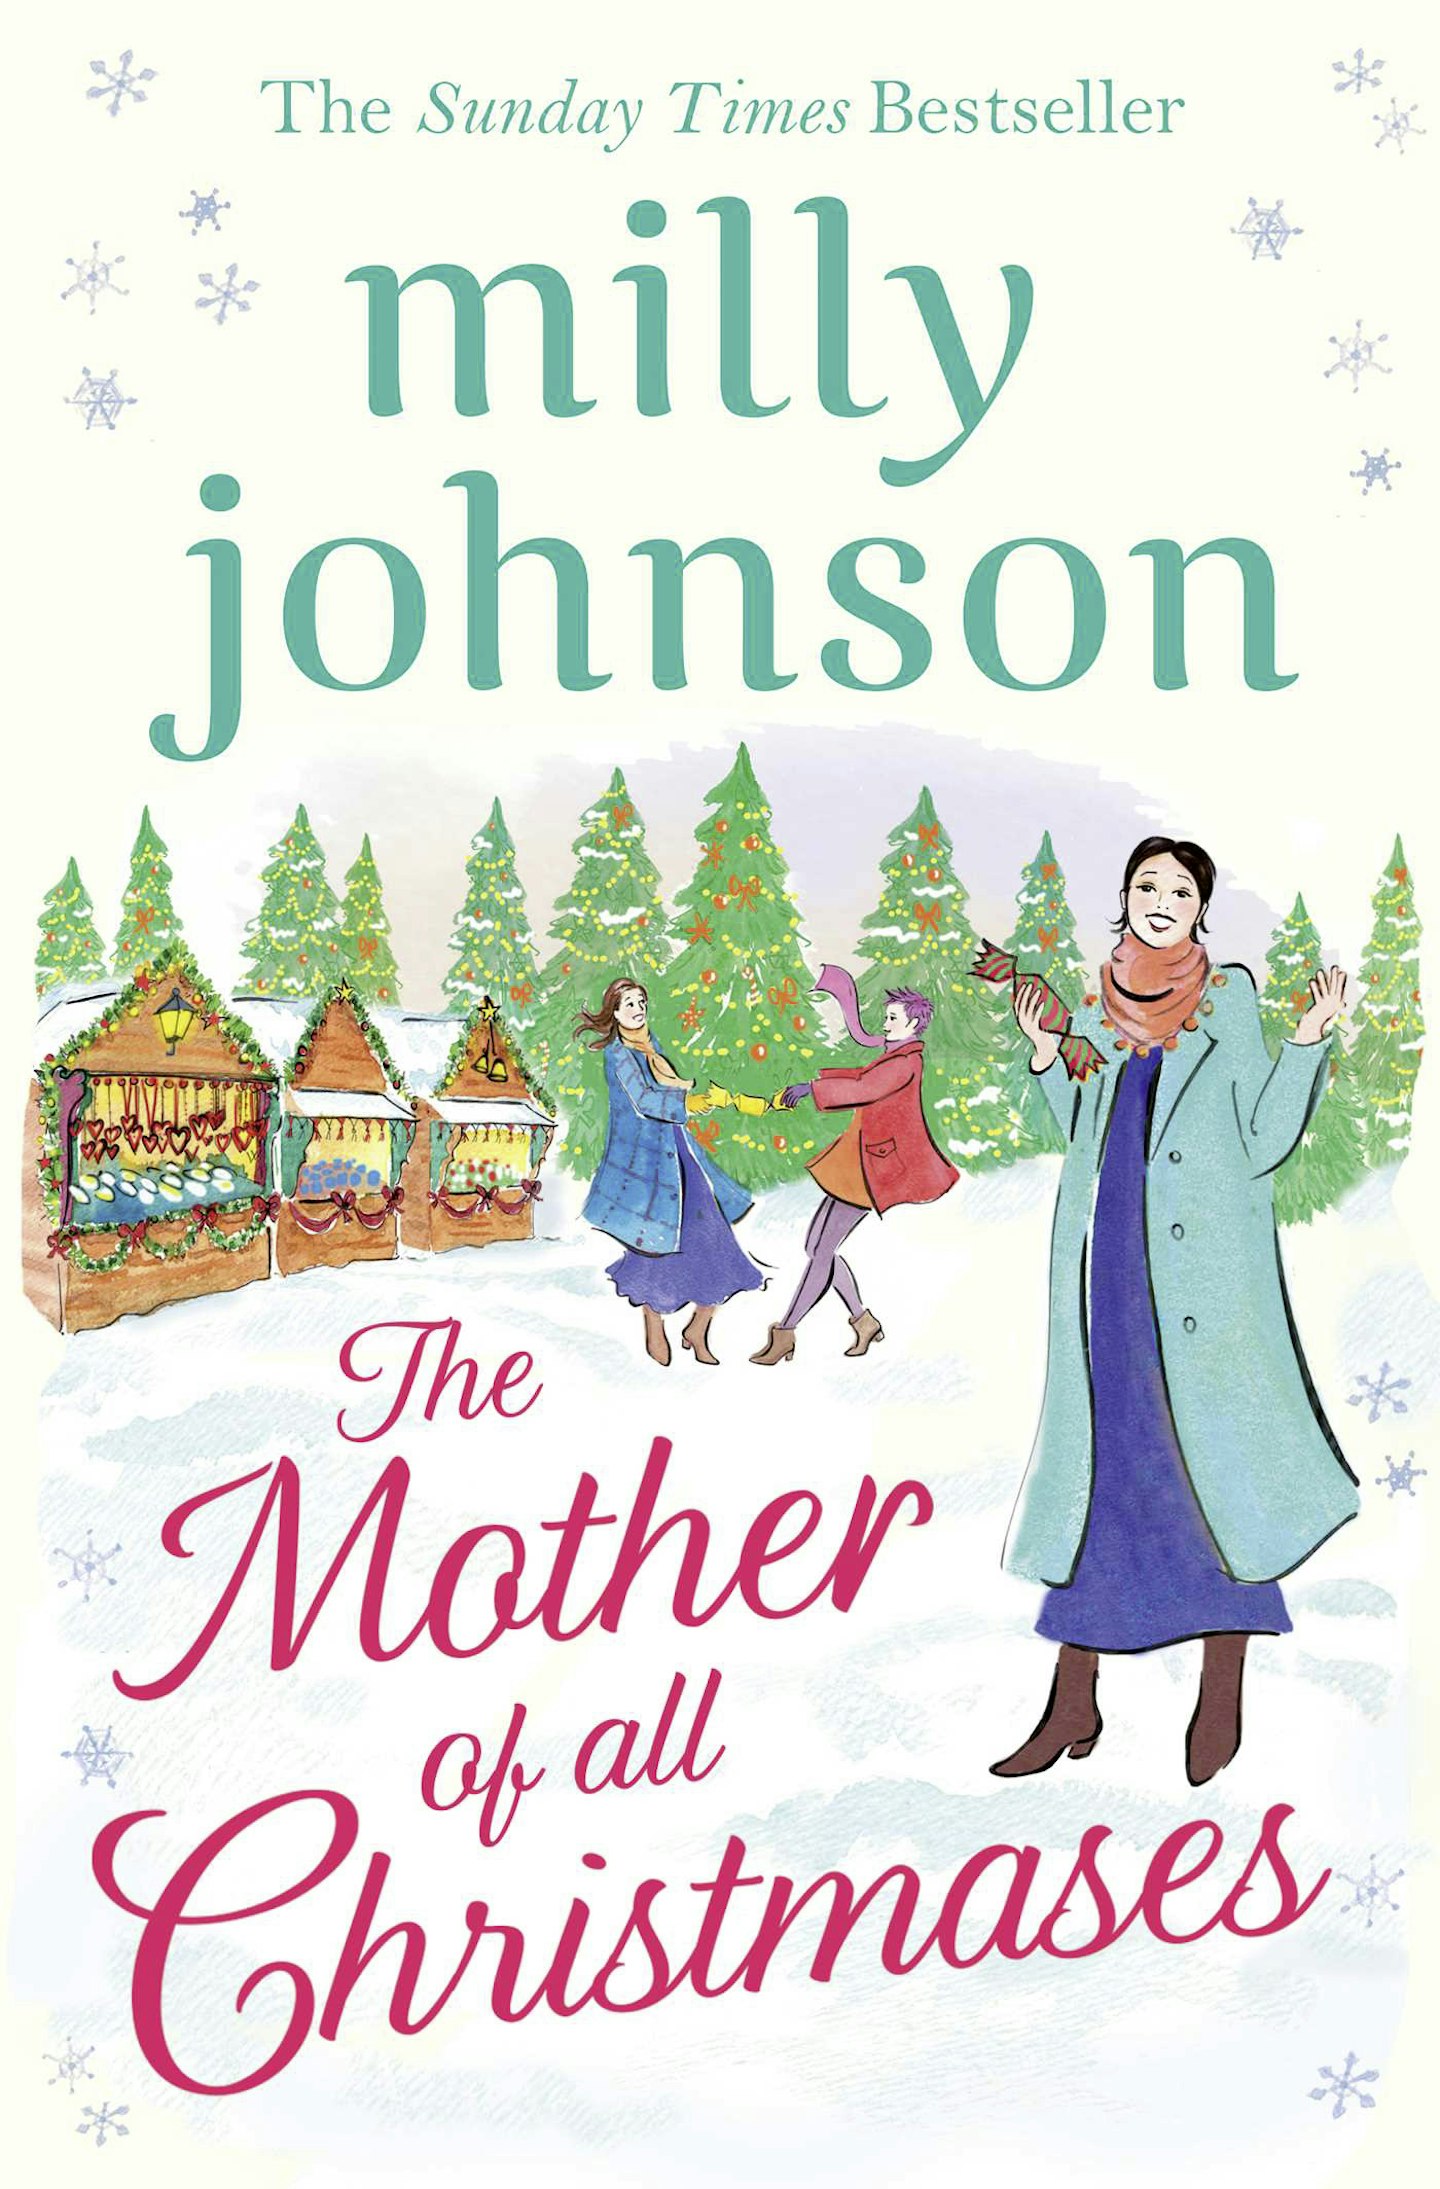 The Mother of All Christmases - Milly Johnson (Simon & Schuster)